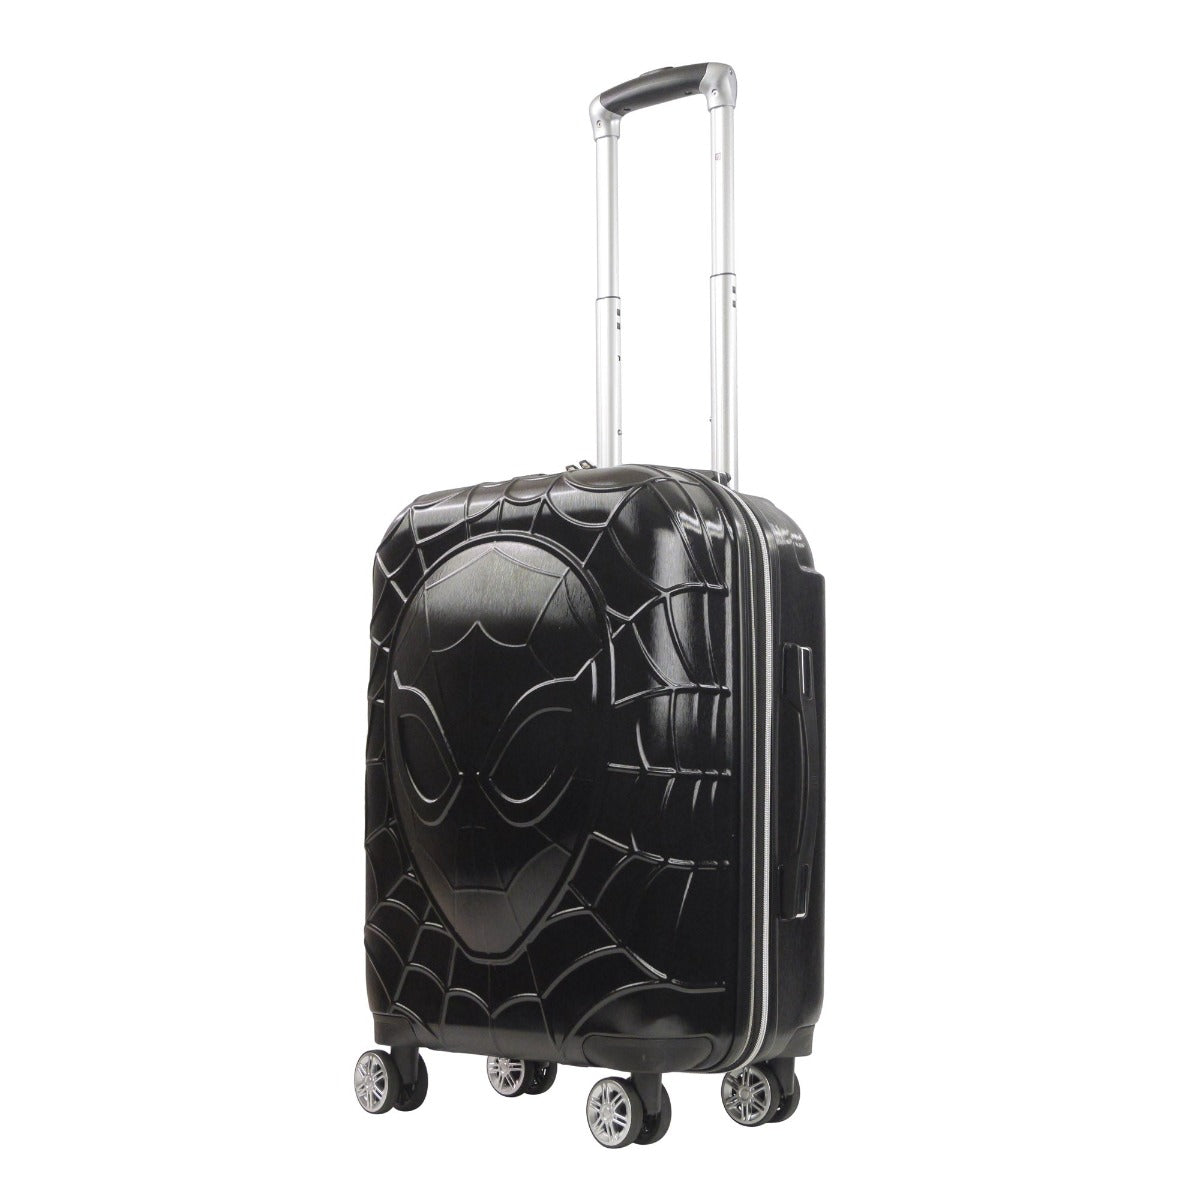 Spiderman Carry-on Hard-sided Spinner Suitcase 23" Luggage Black